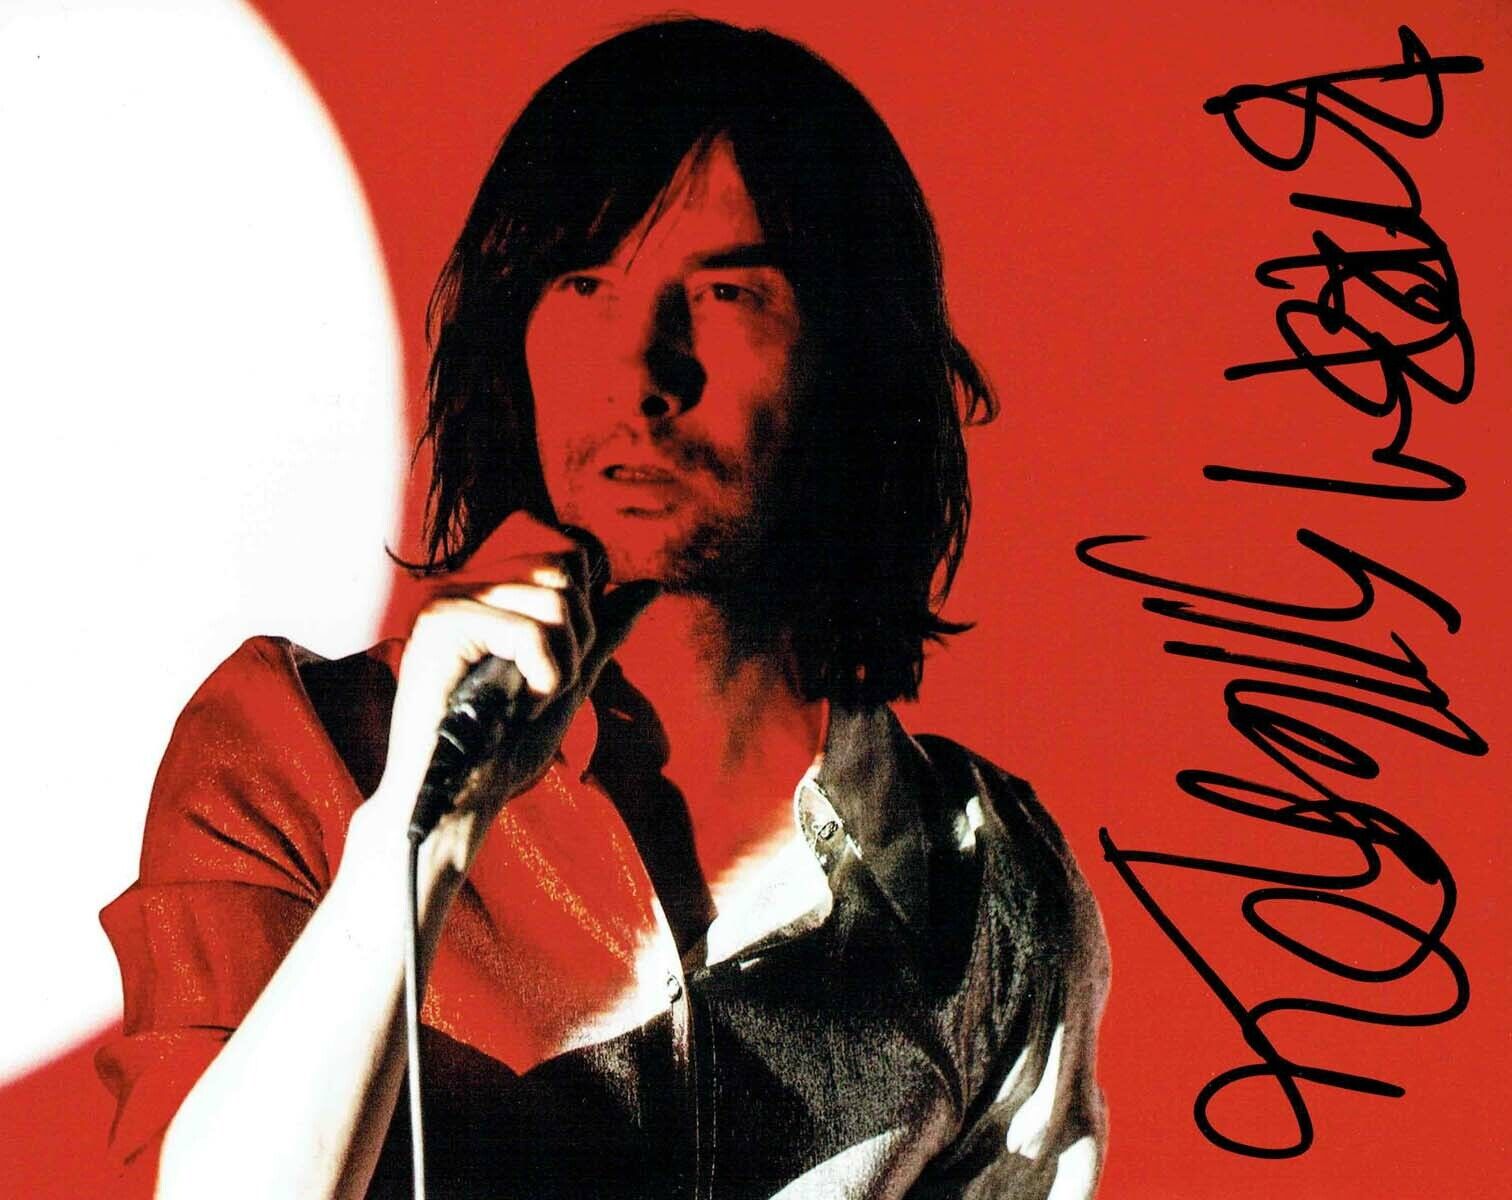 Bobby GILLESPIE Primal Scream SIGNED Autograph 10x8 Photo Poster painting 1 AFTAL COA